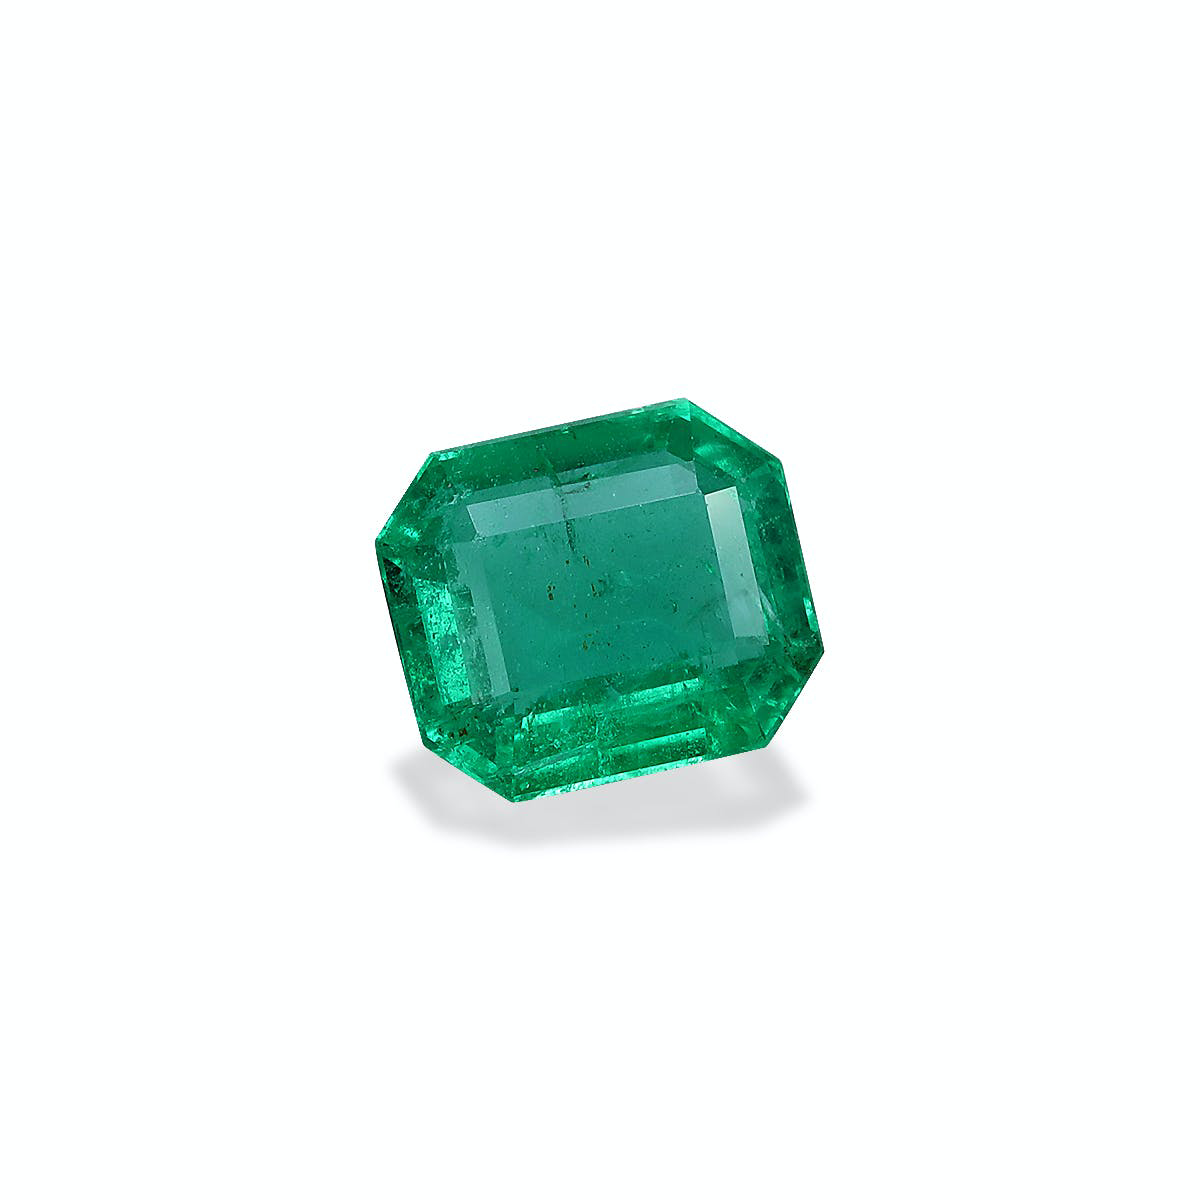 Picture of Green Zambian Emerald 1.47ct (PG0384)